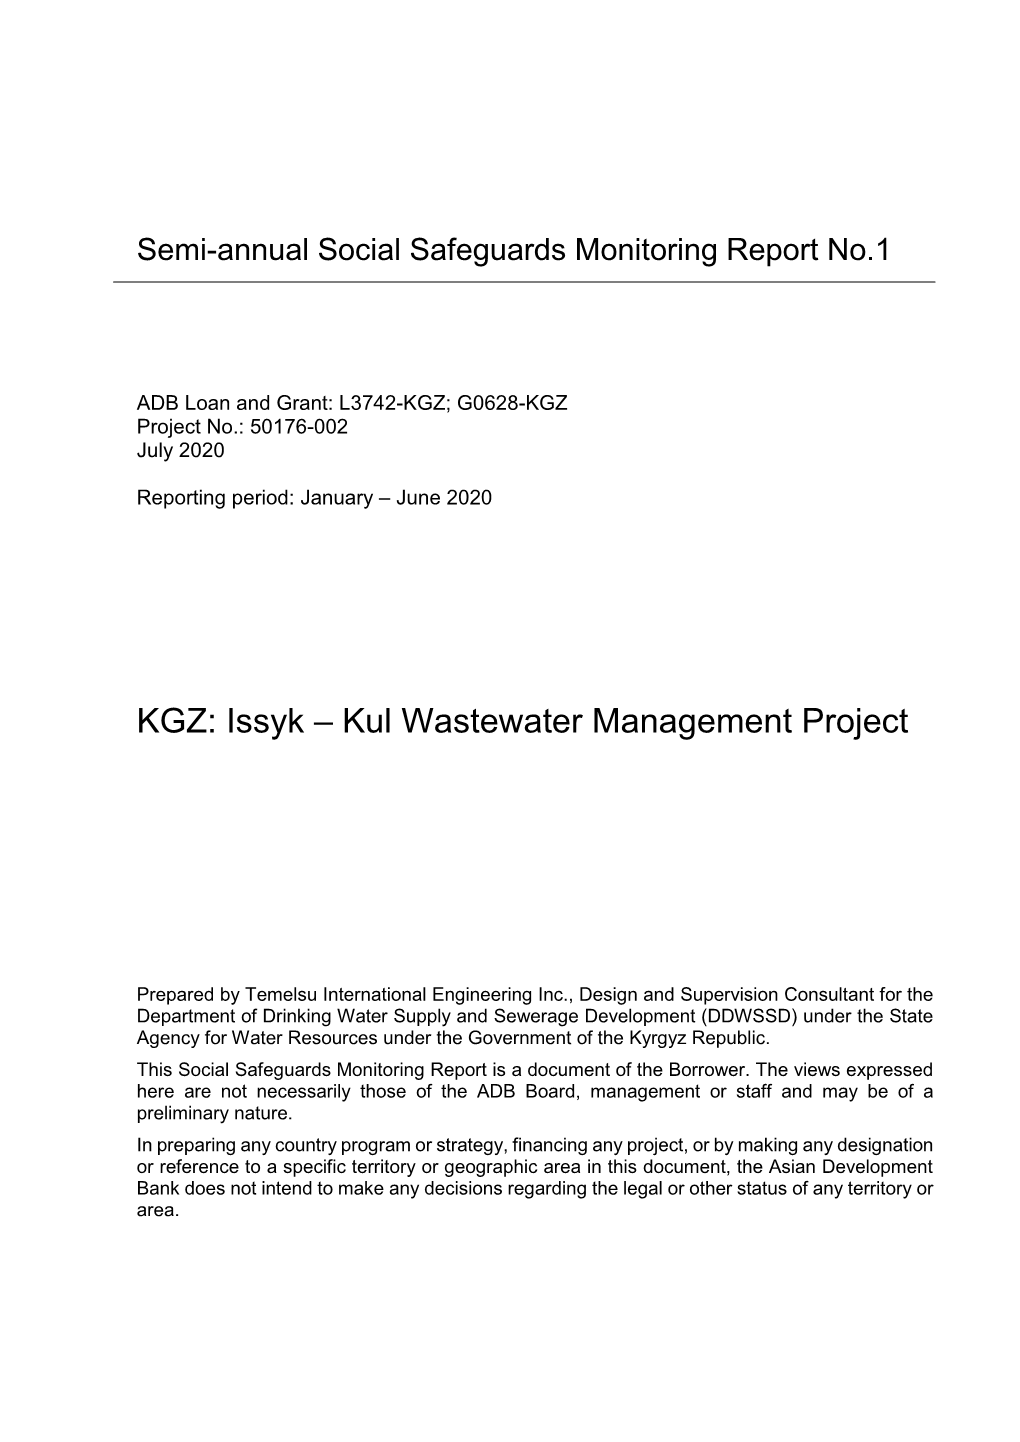 KGZ: Issyk – Kul Wastewater Management Project